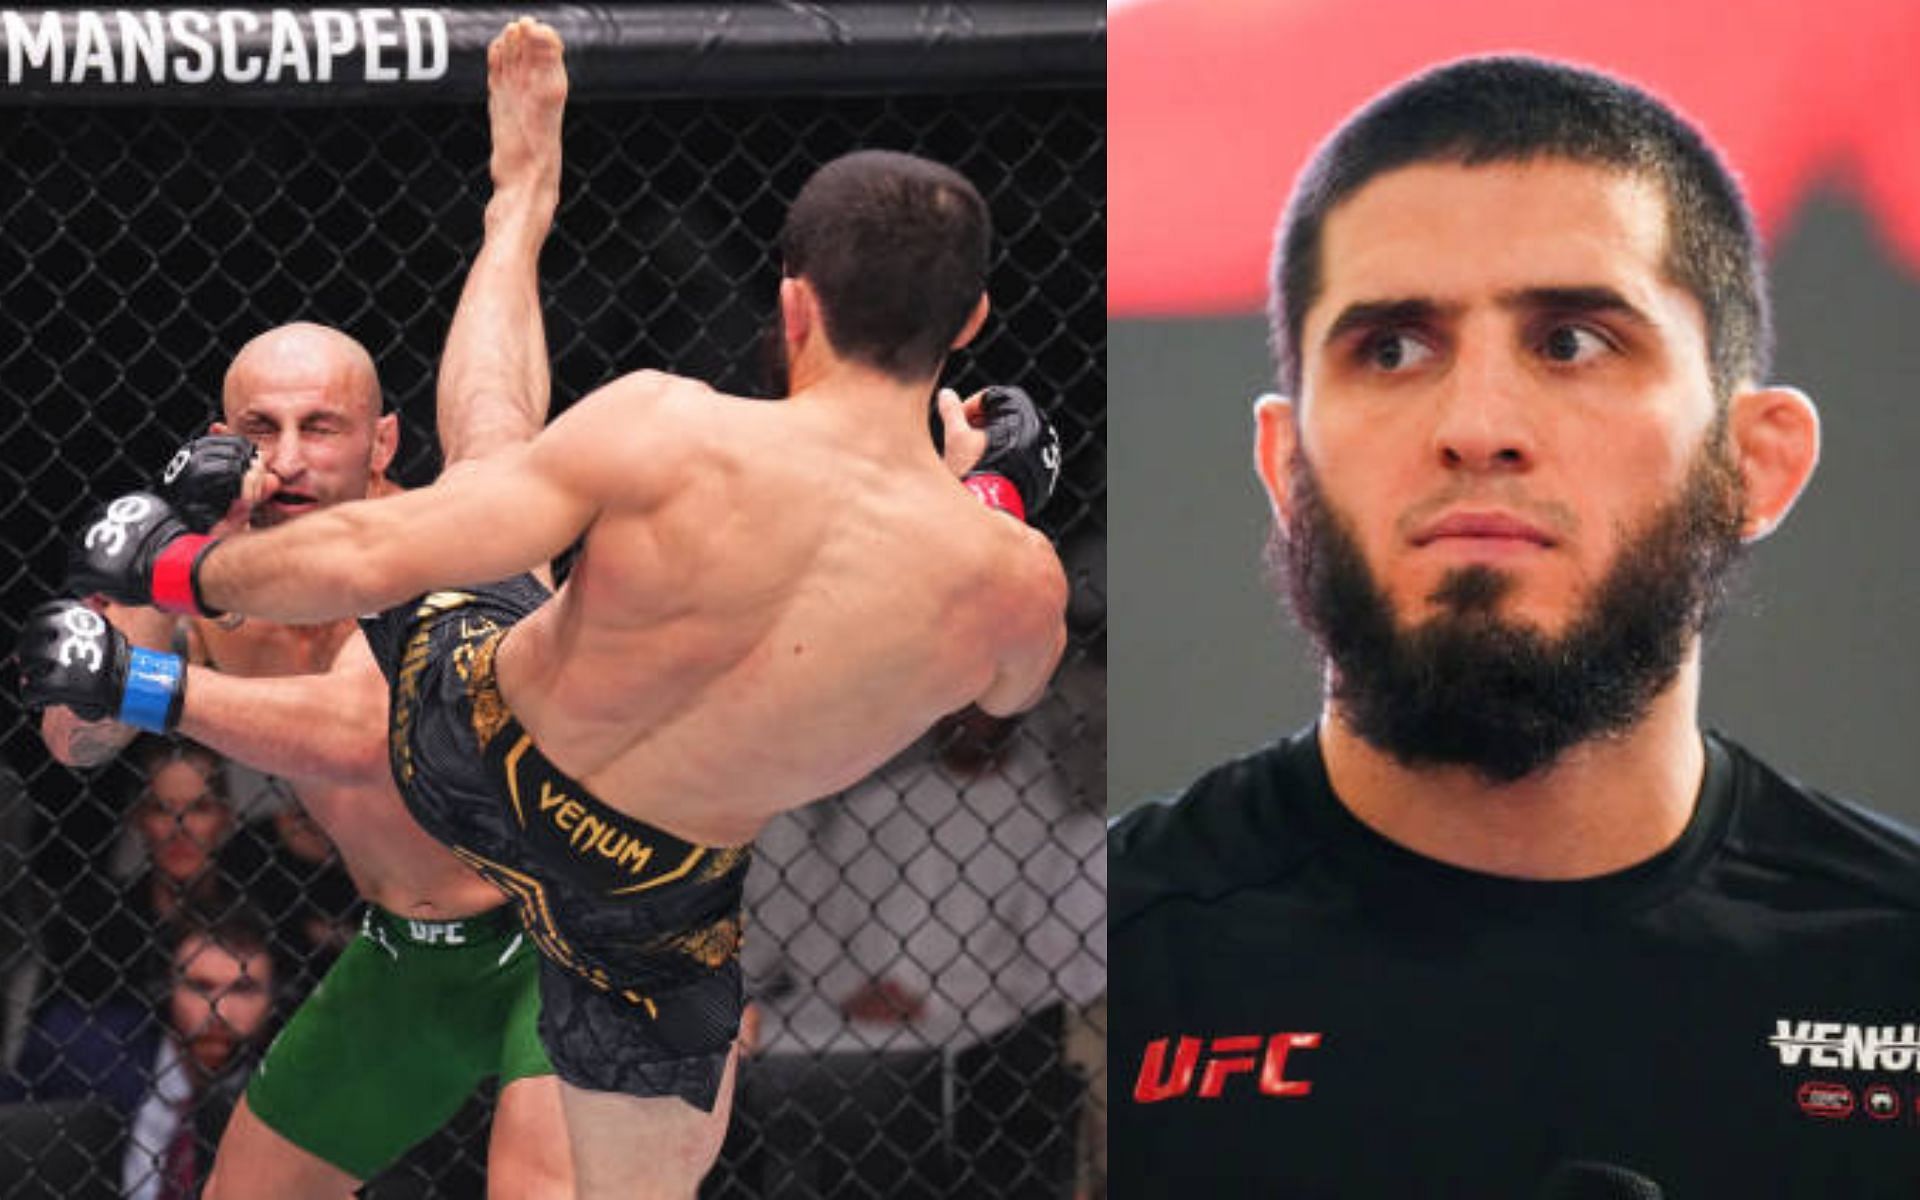 Islam Makhachev vs. Alex Volkanovski (left) and Islam Makhachev (right) [Images Courtesy: @GettyImages]